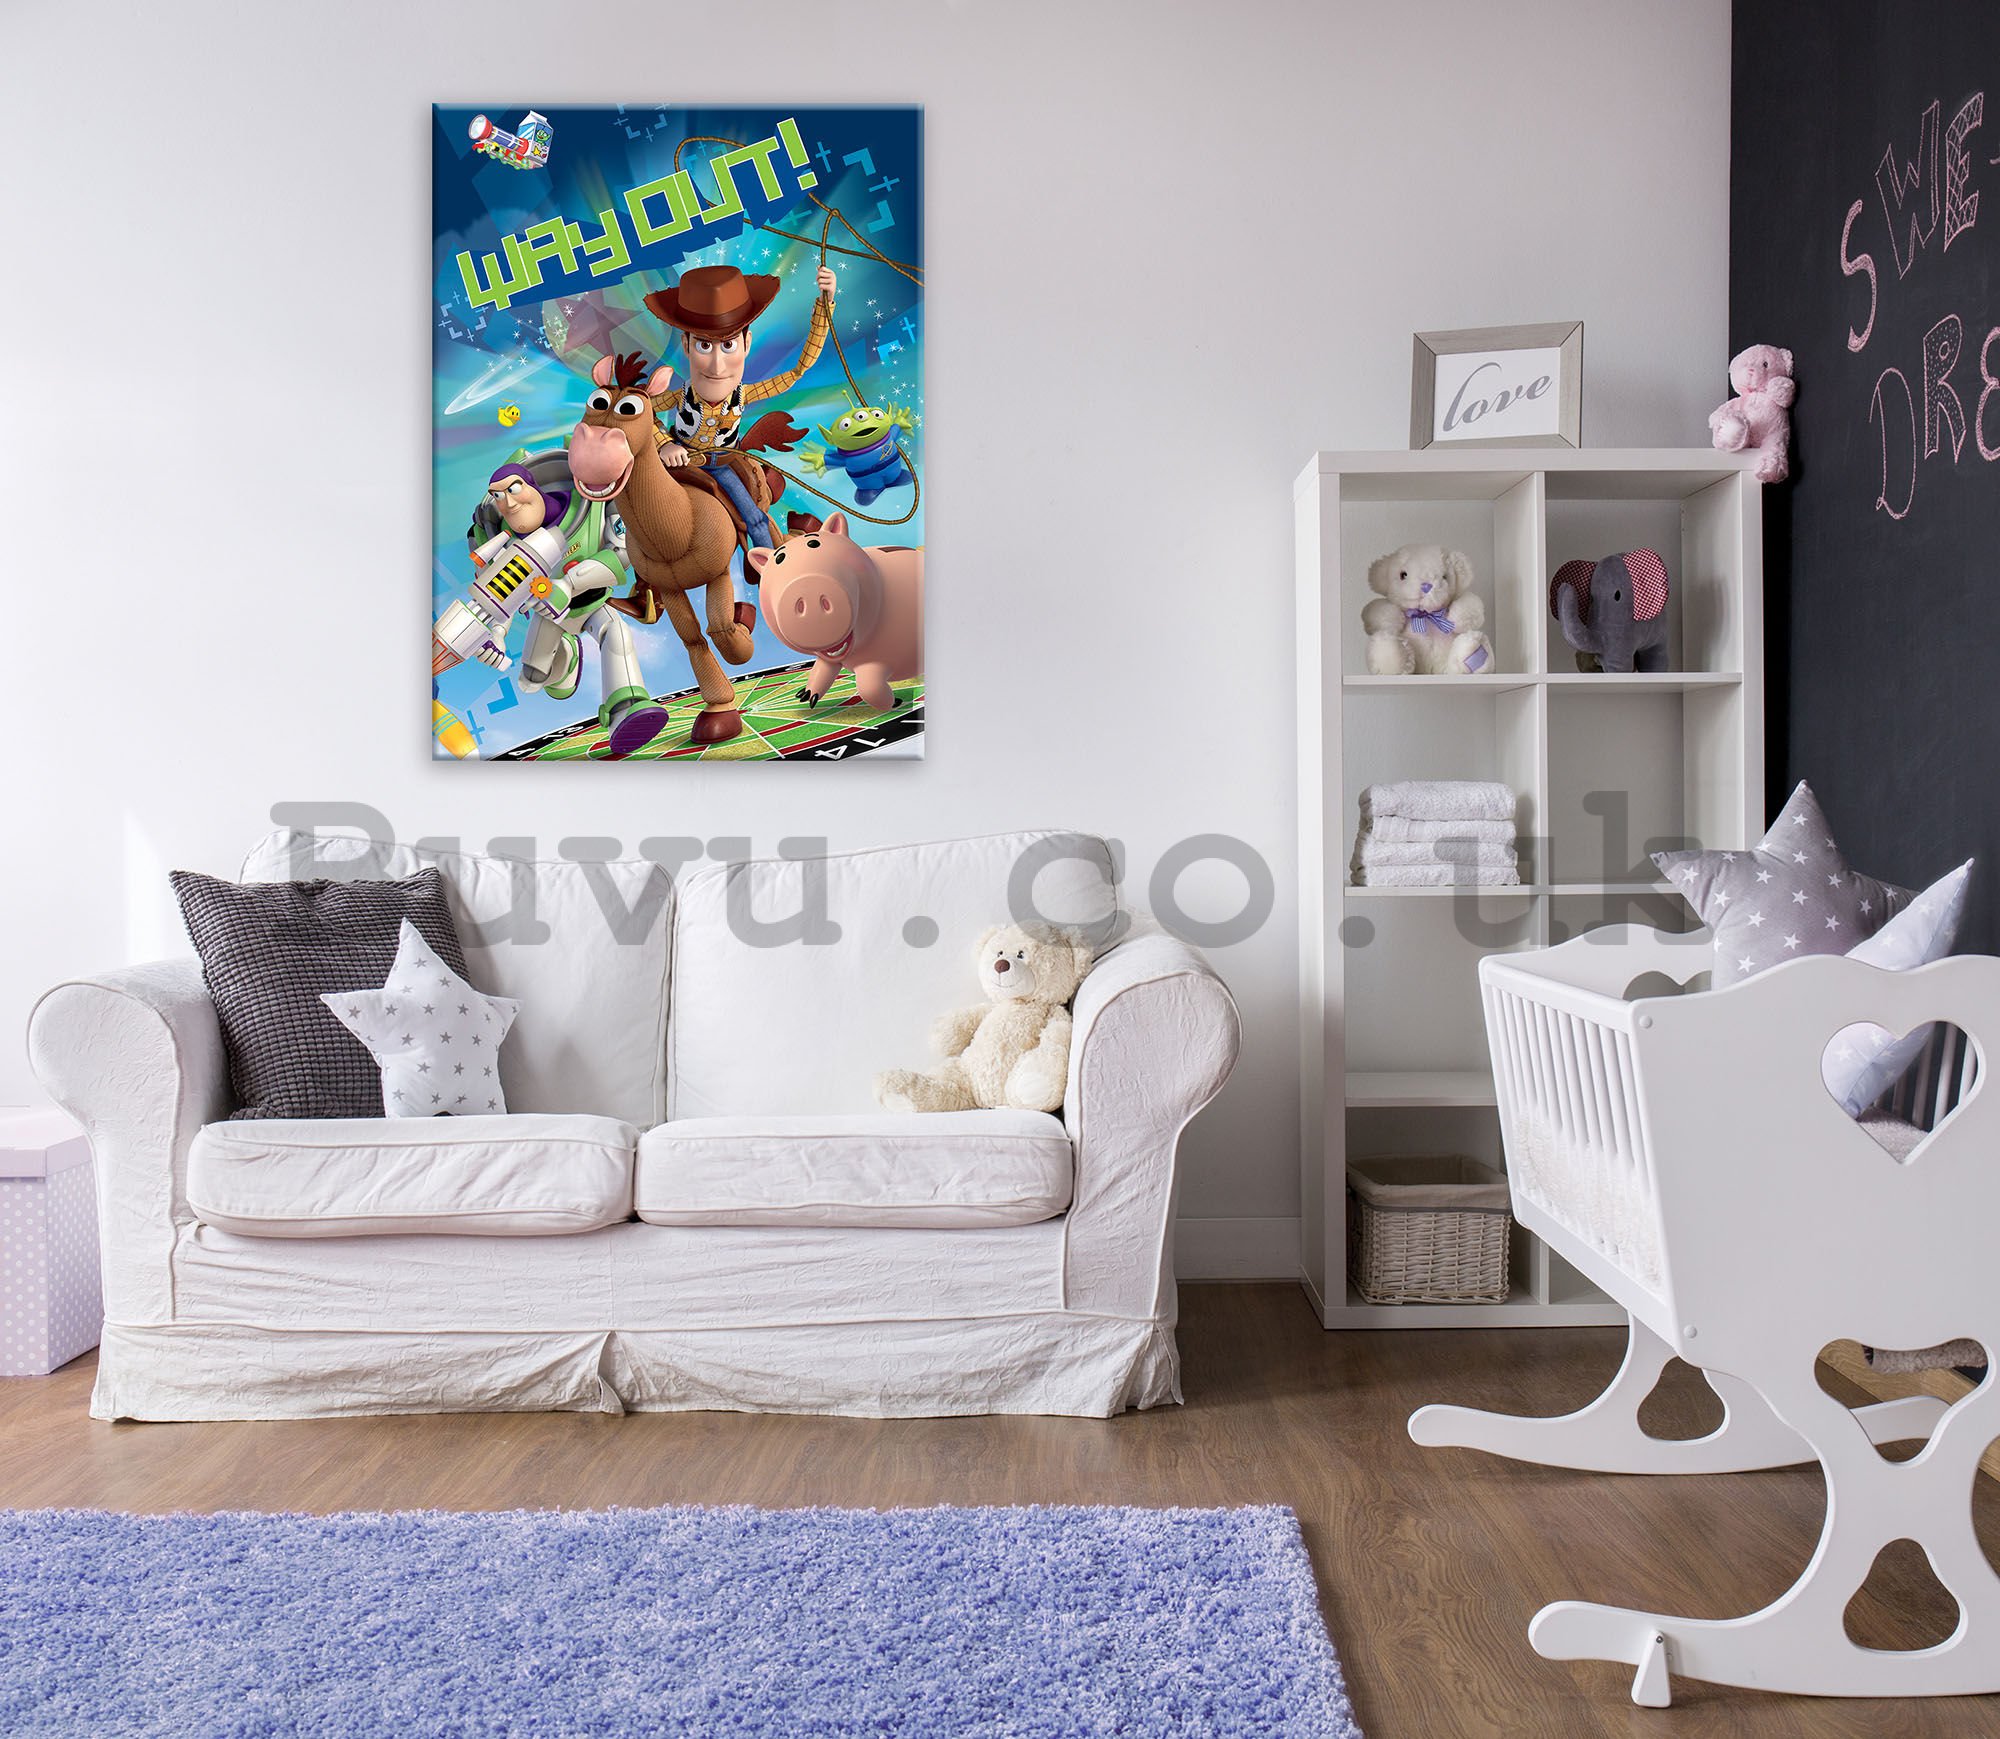 Painting on canvas: Toy Story (Way Out!) - 75x100 cm